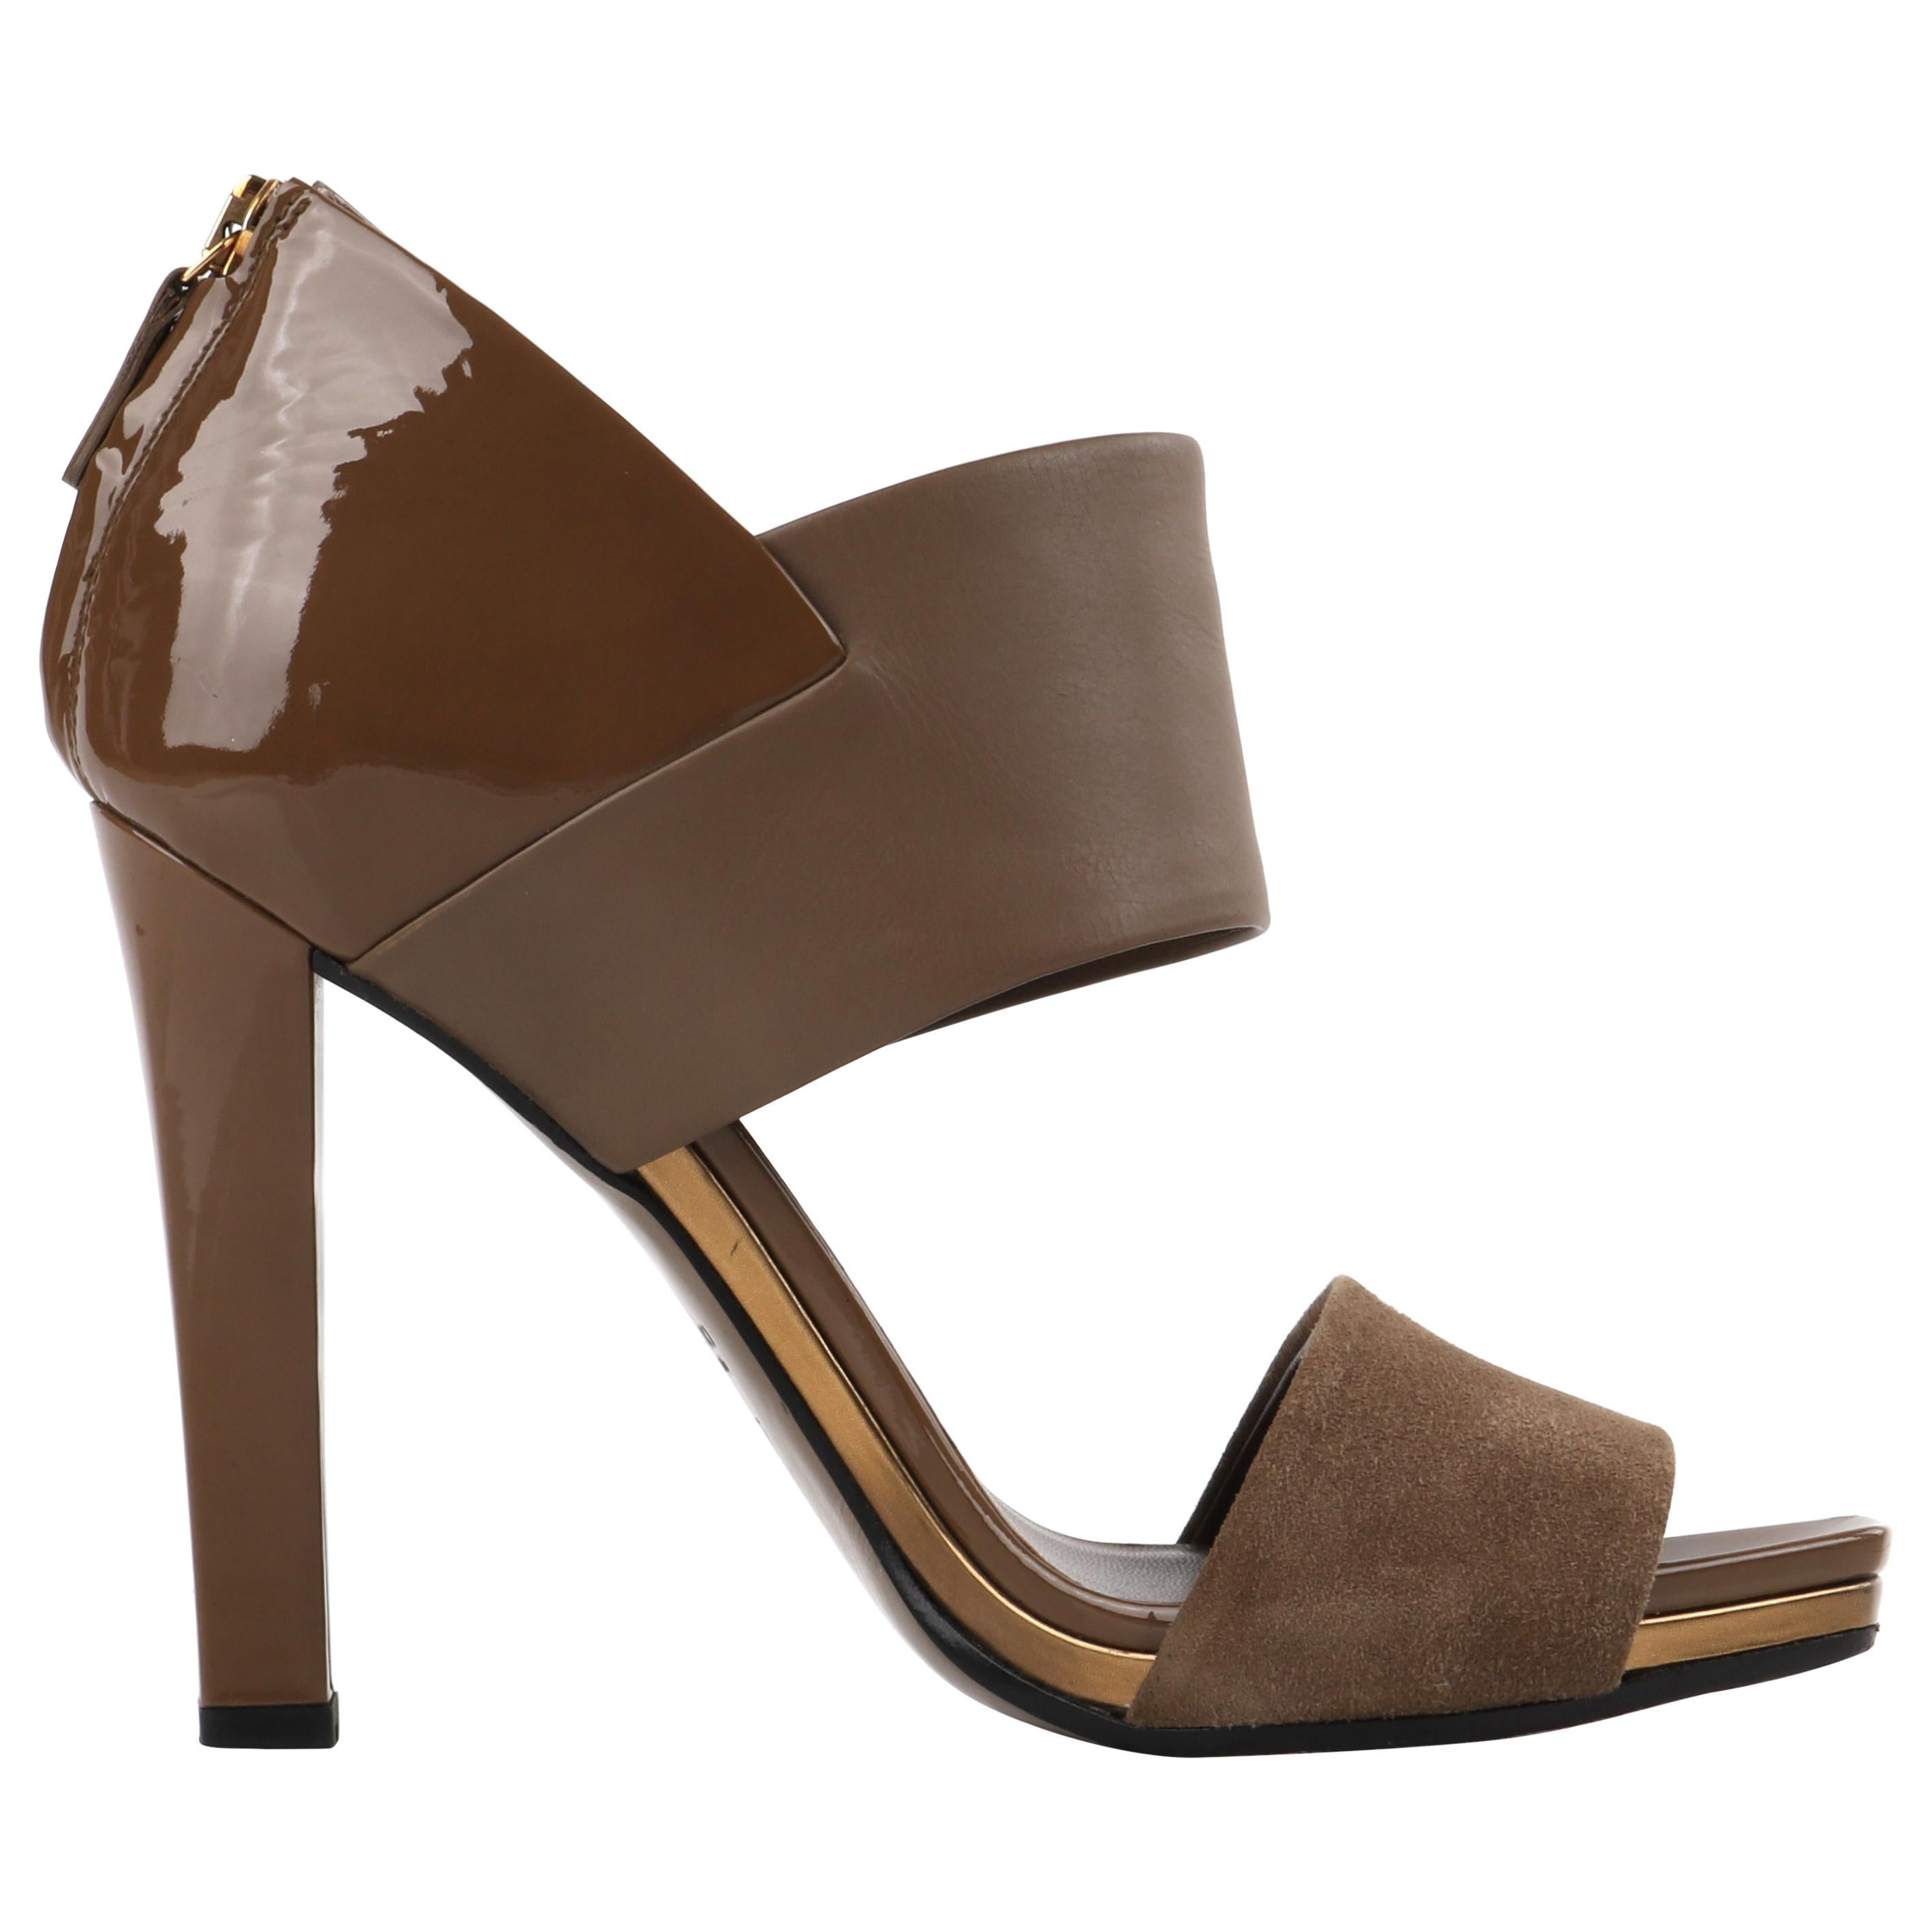 GUCCI Taupe Brown Patent Leather & Suede Vamp Open Toe Heel - Size 37 For Sale